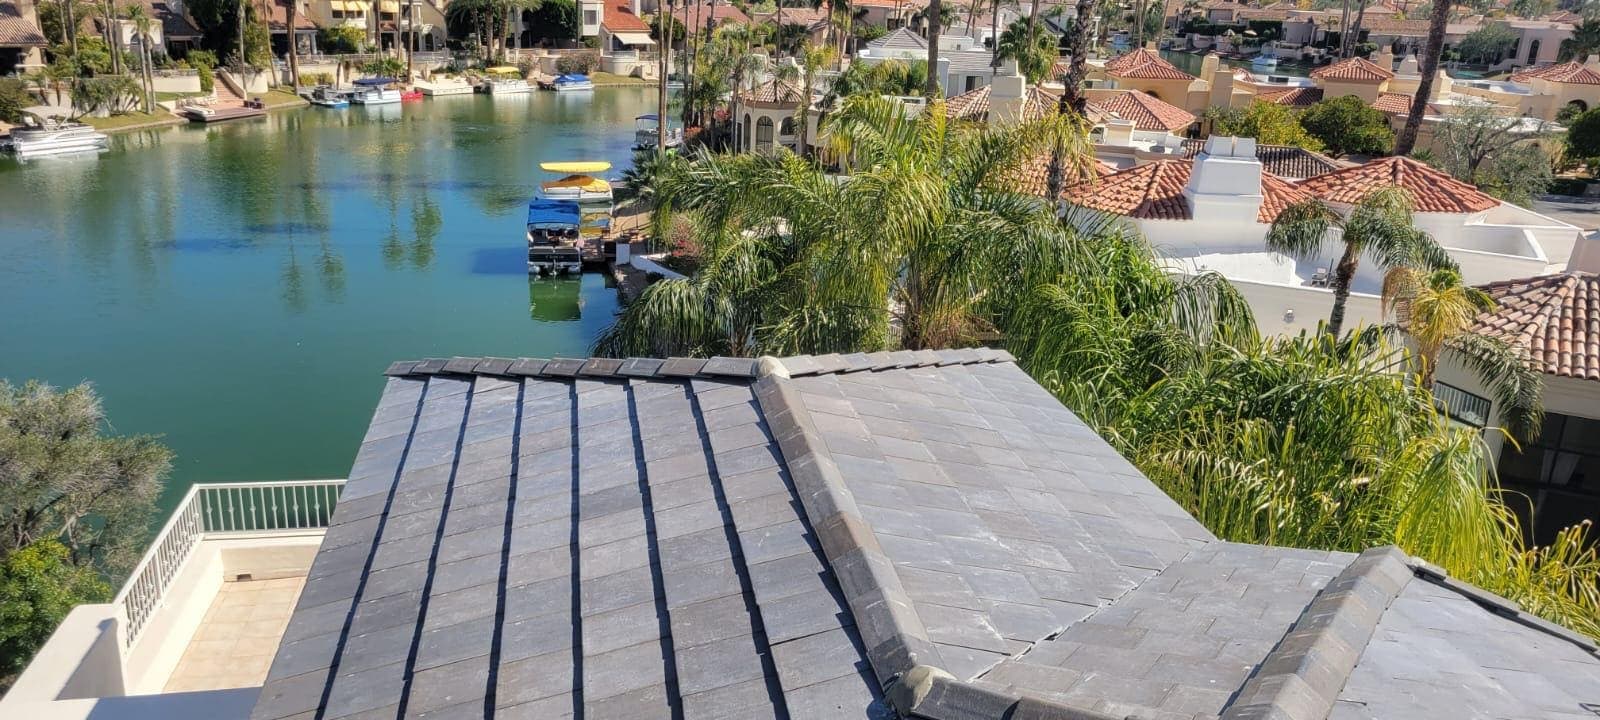 A view from the roof of a house overlooking a canal, showcasing the beautifully installed Tempe tile roofing.